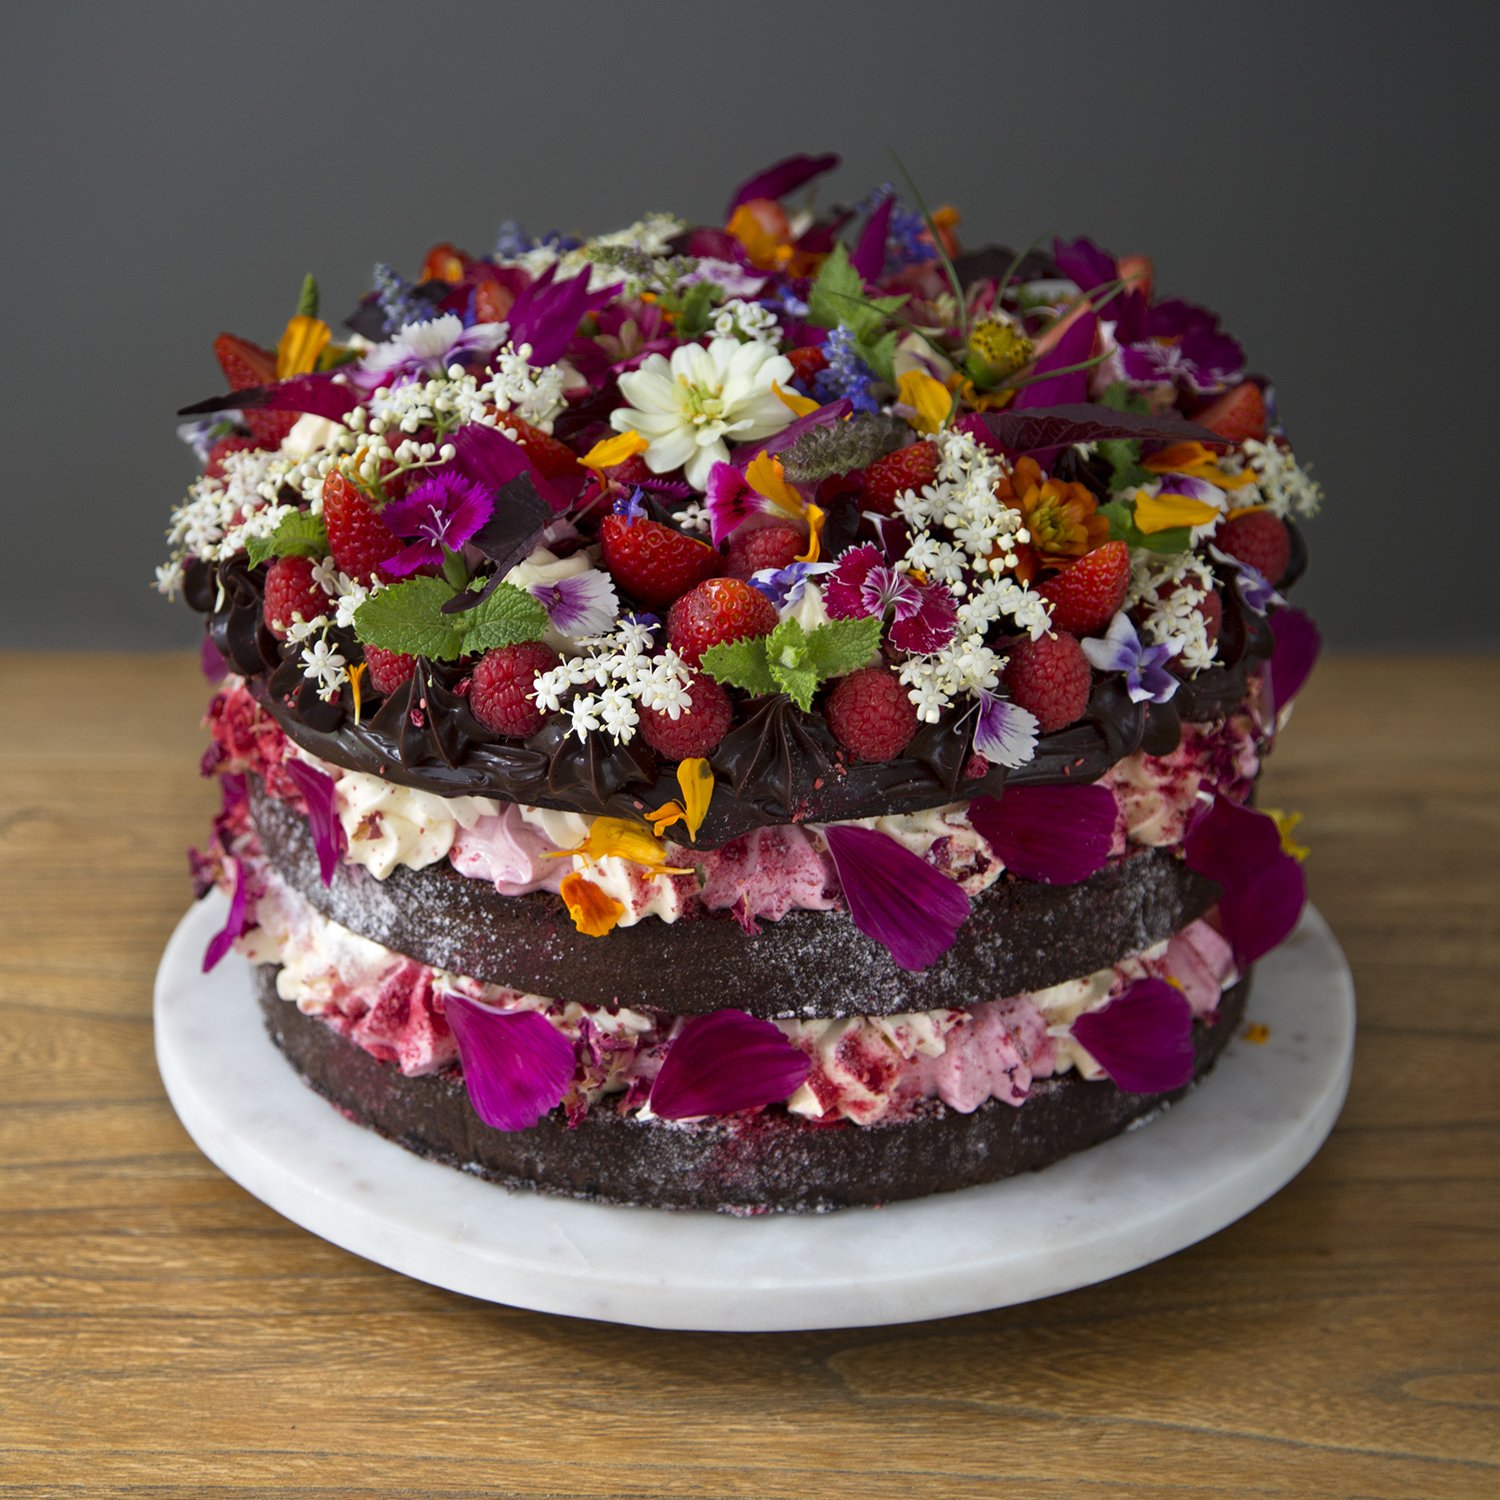 CHOCOLATE, ROSE AND BERRY CAKE